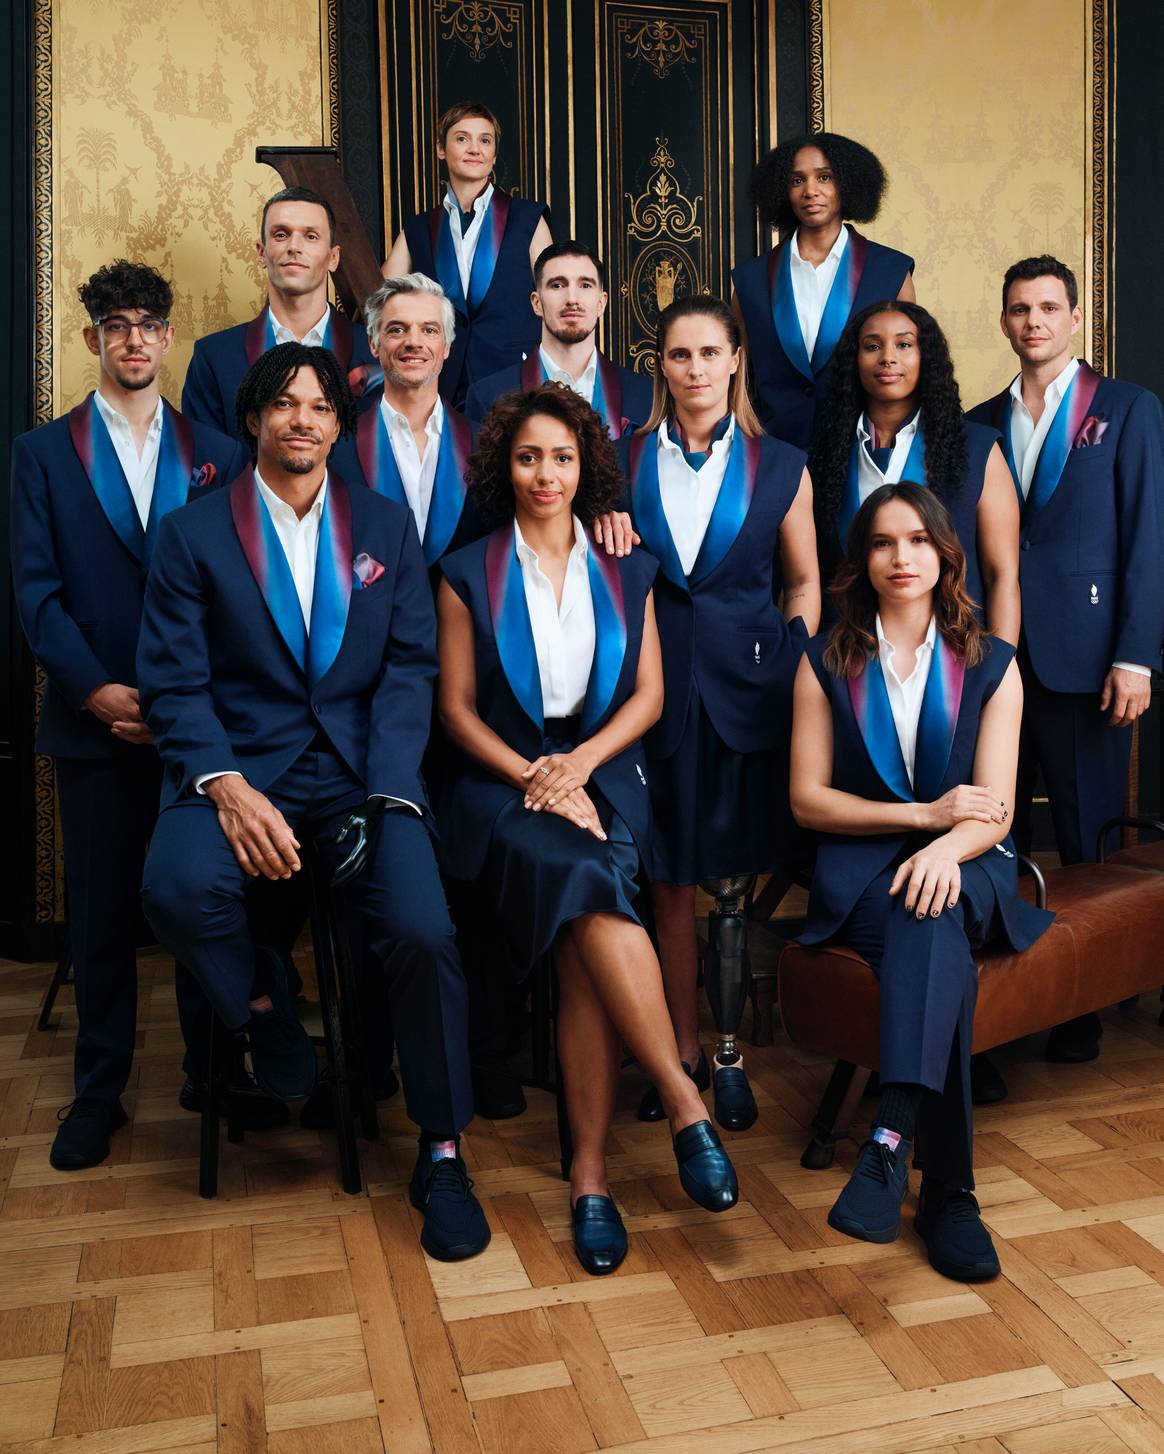 Berluti Team France’s Paris 2024 Olympic opening ceremony outfits